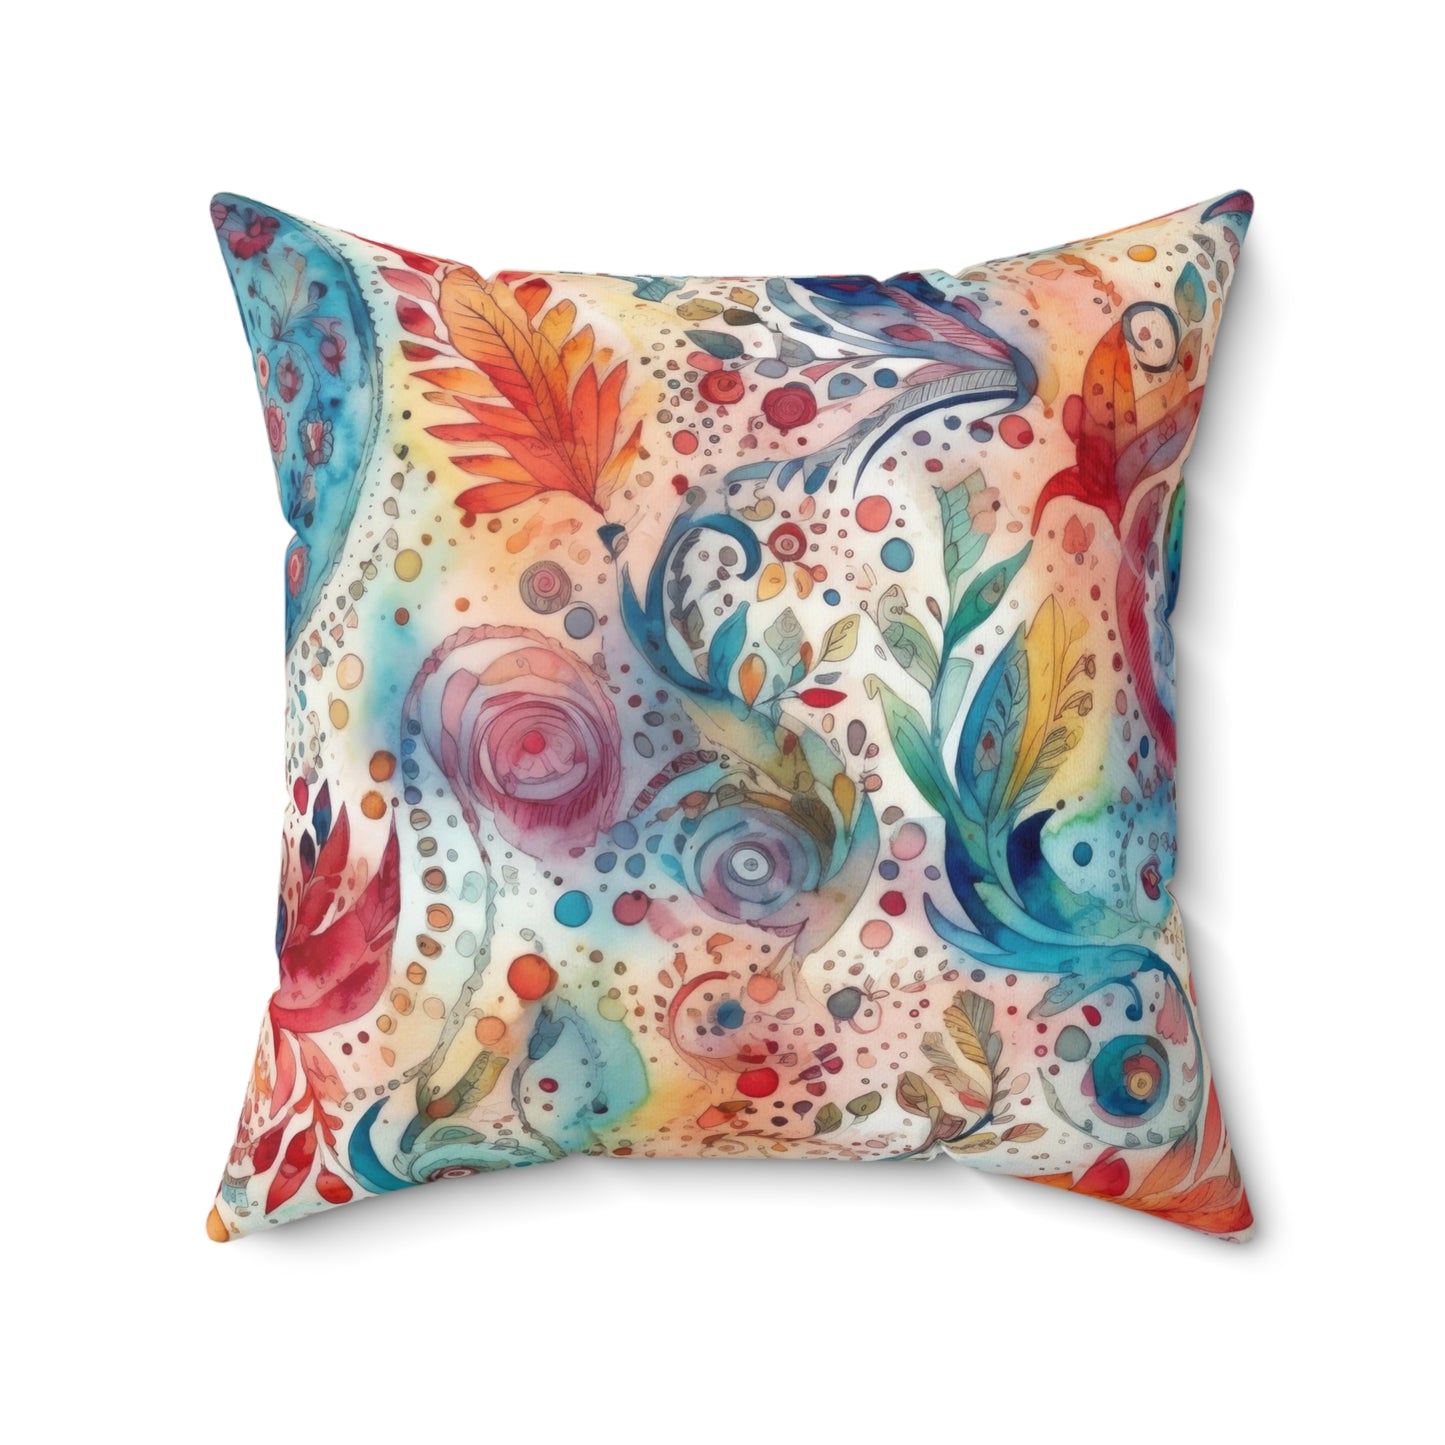 Watercolor Multicolor Paisleys 4 - Beautiful, Shabby Chic, Boho, Fun - Faux Suede Square Pillow